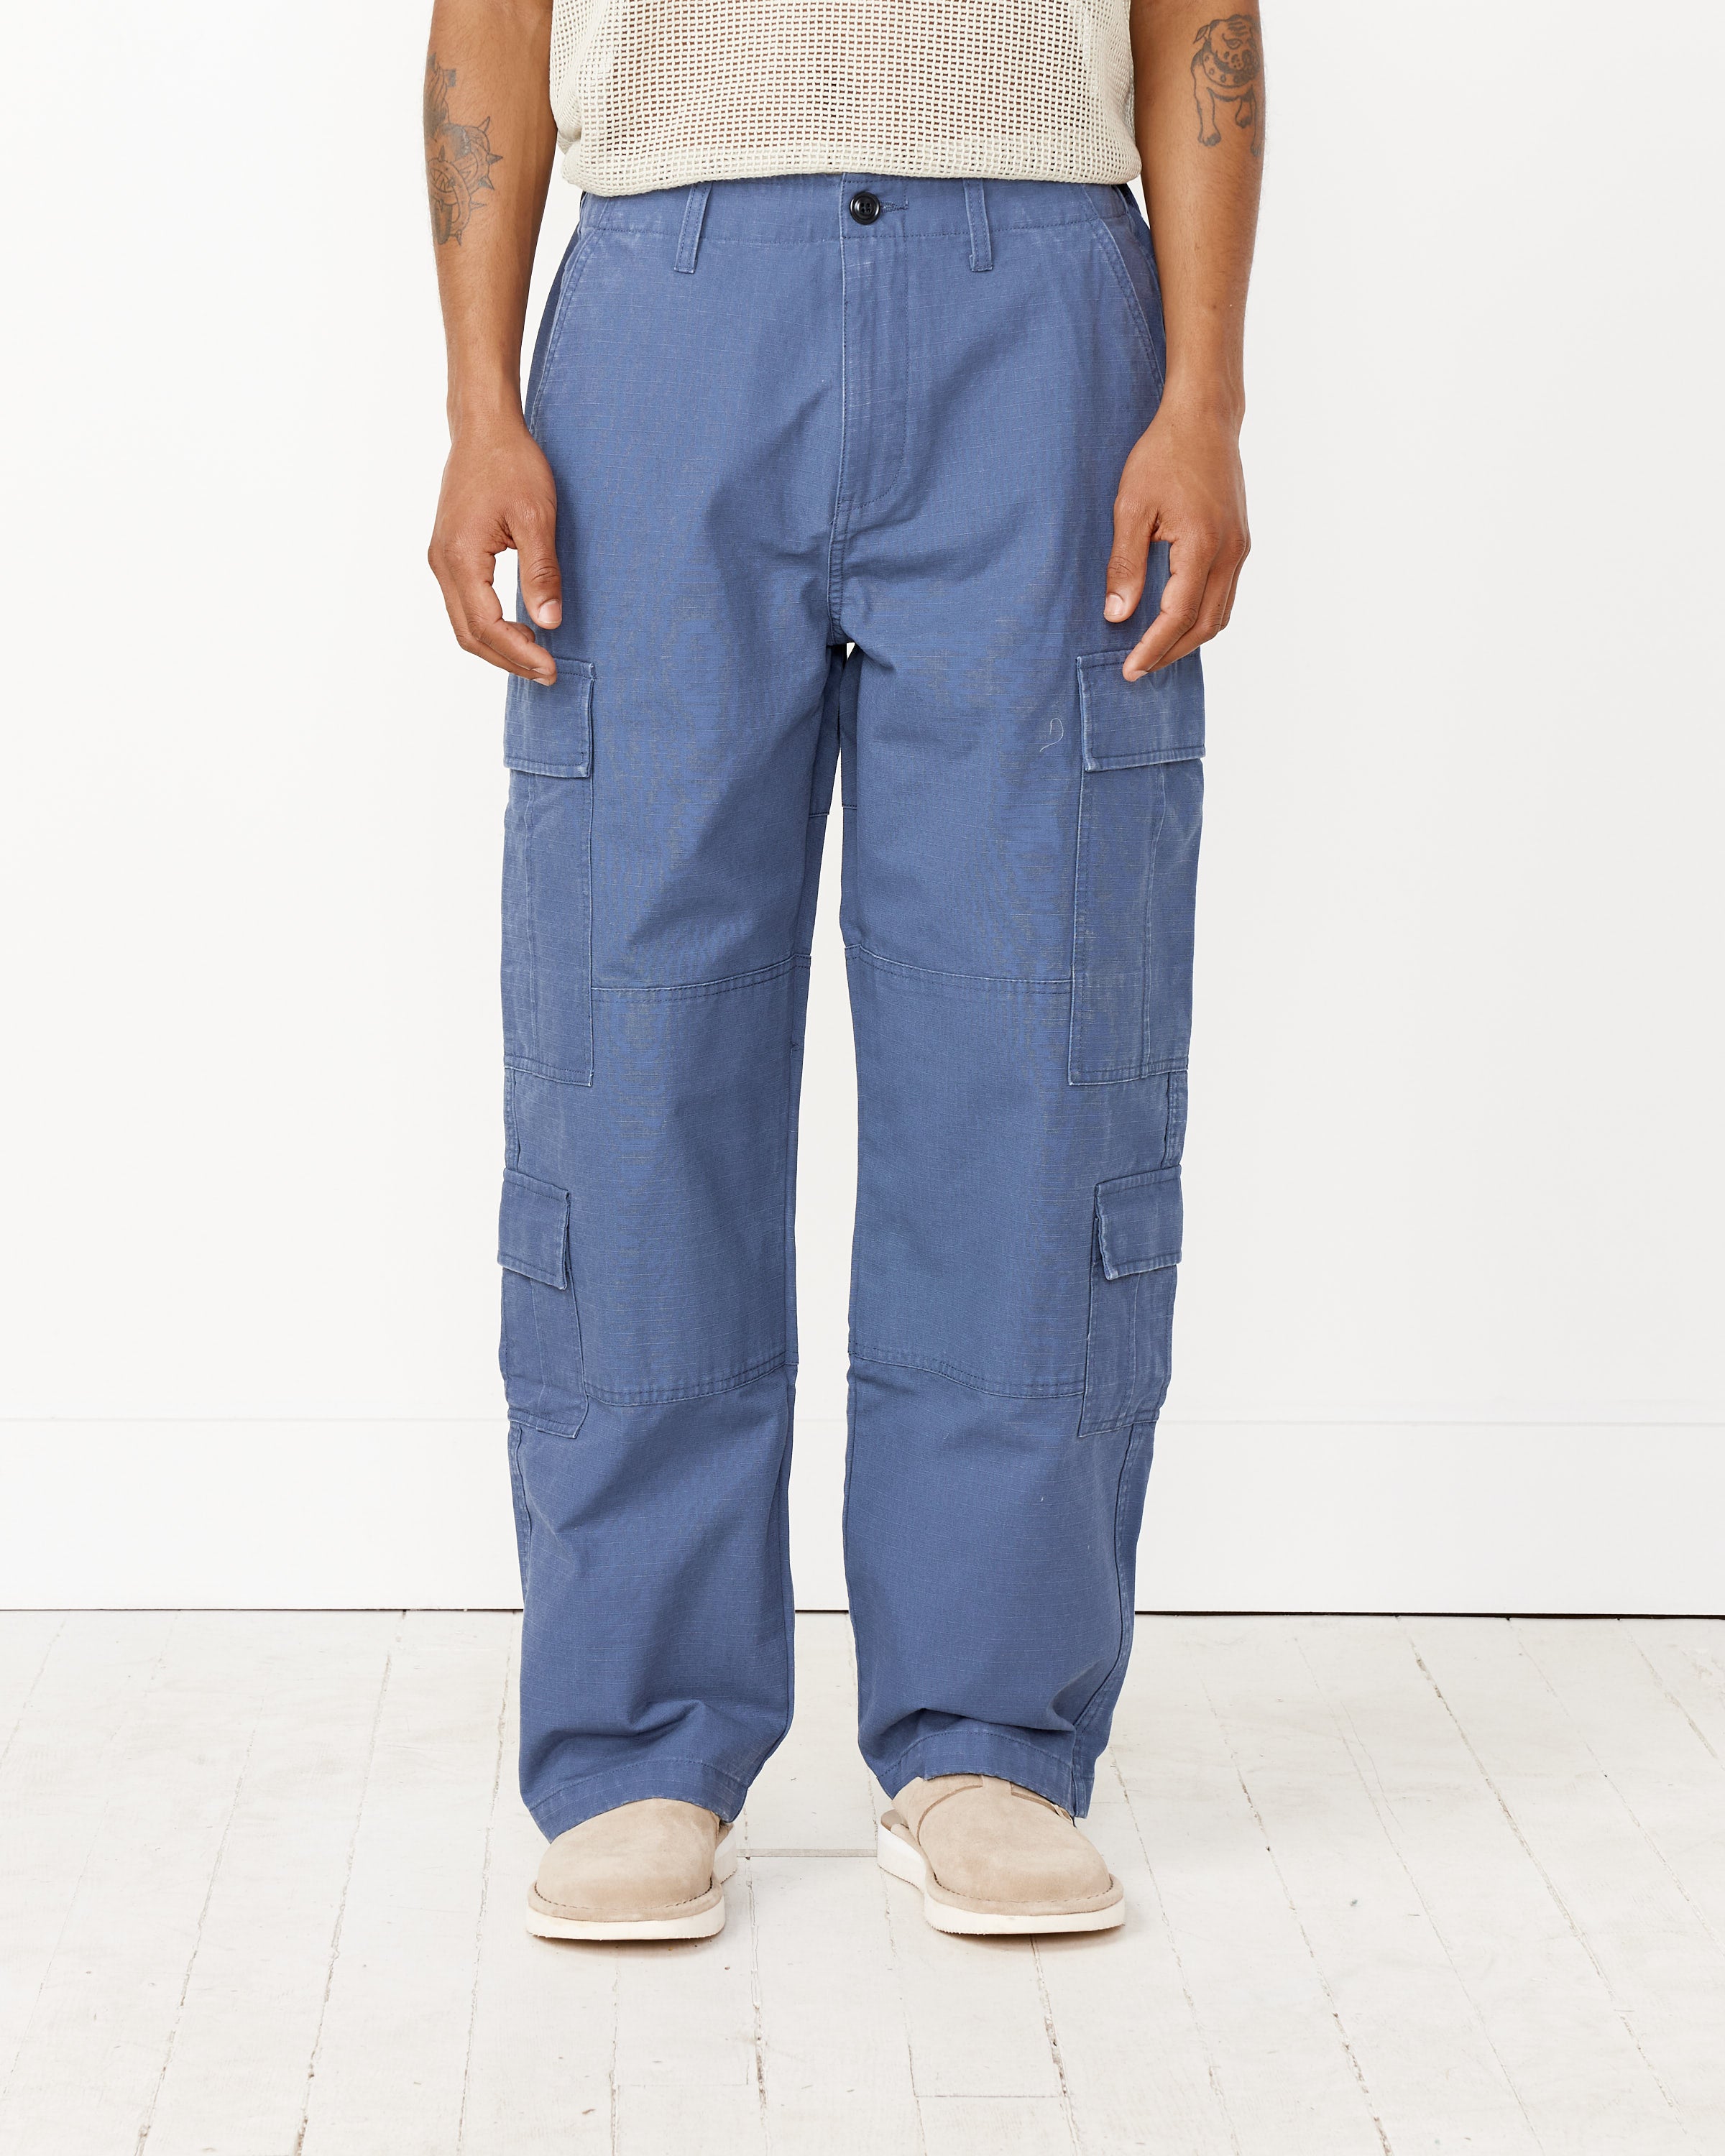 Ripstop Surplus Cargo in Washed Blue – Mohawk General Store